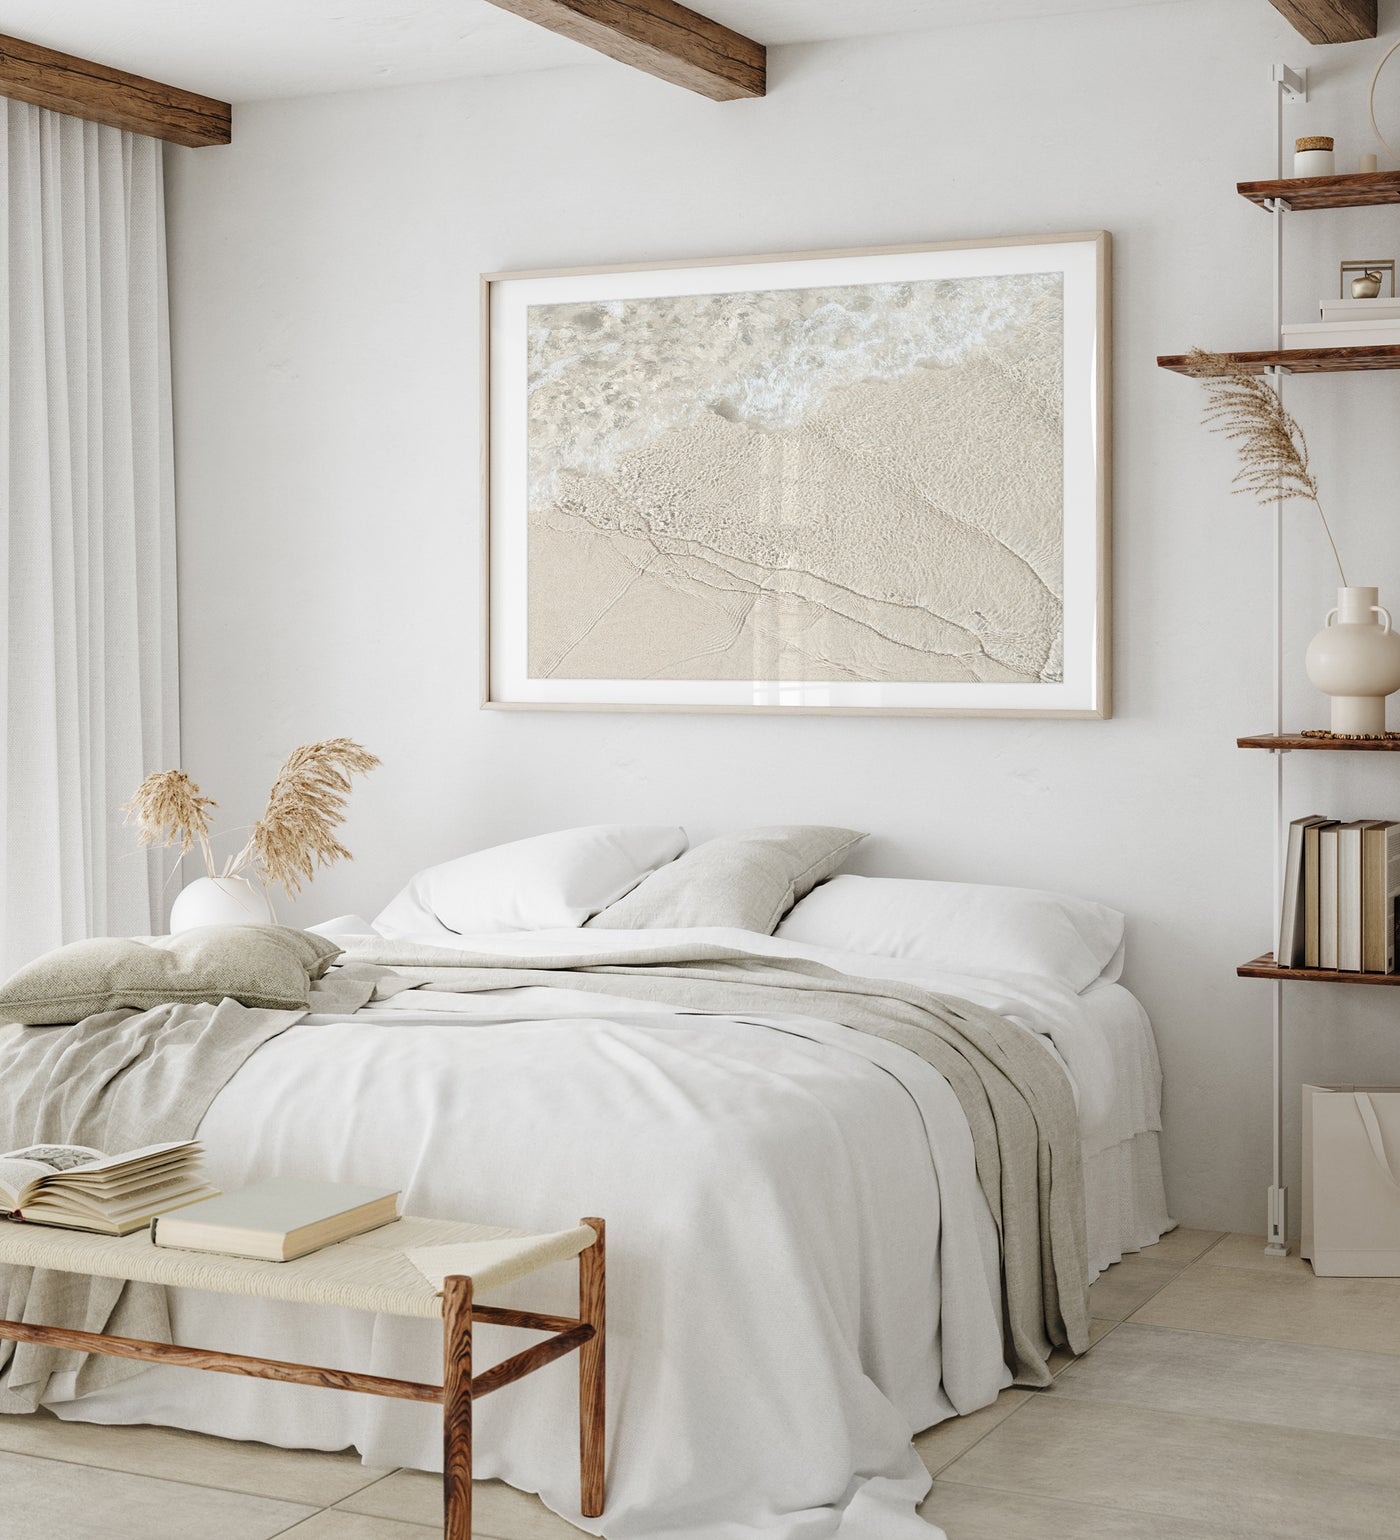 Shallow Water No 11 - Large neutral coastal wall art by Cattie Coyle Photography in bedroom